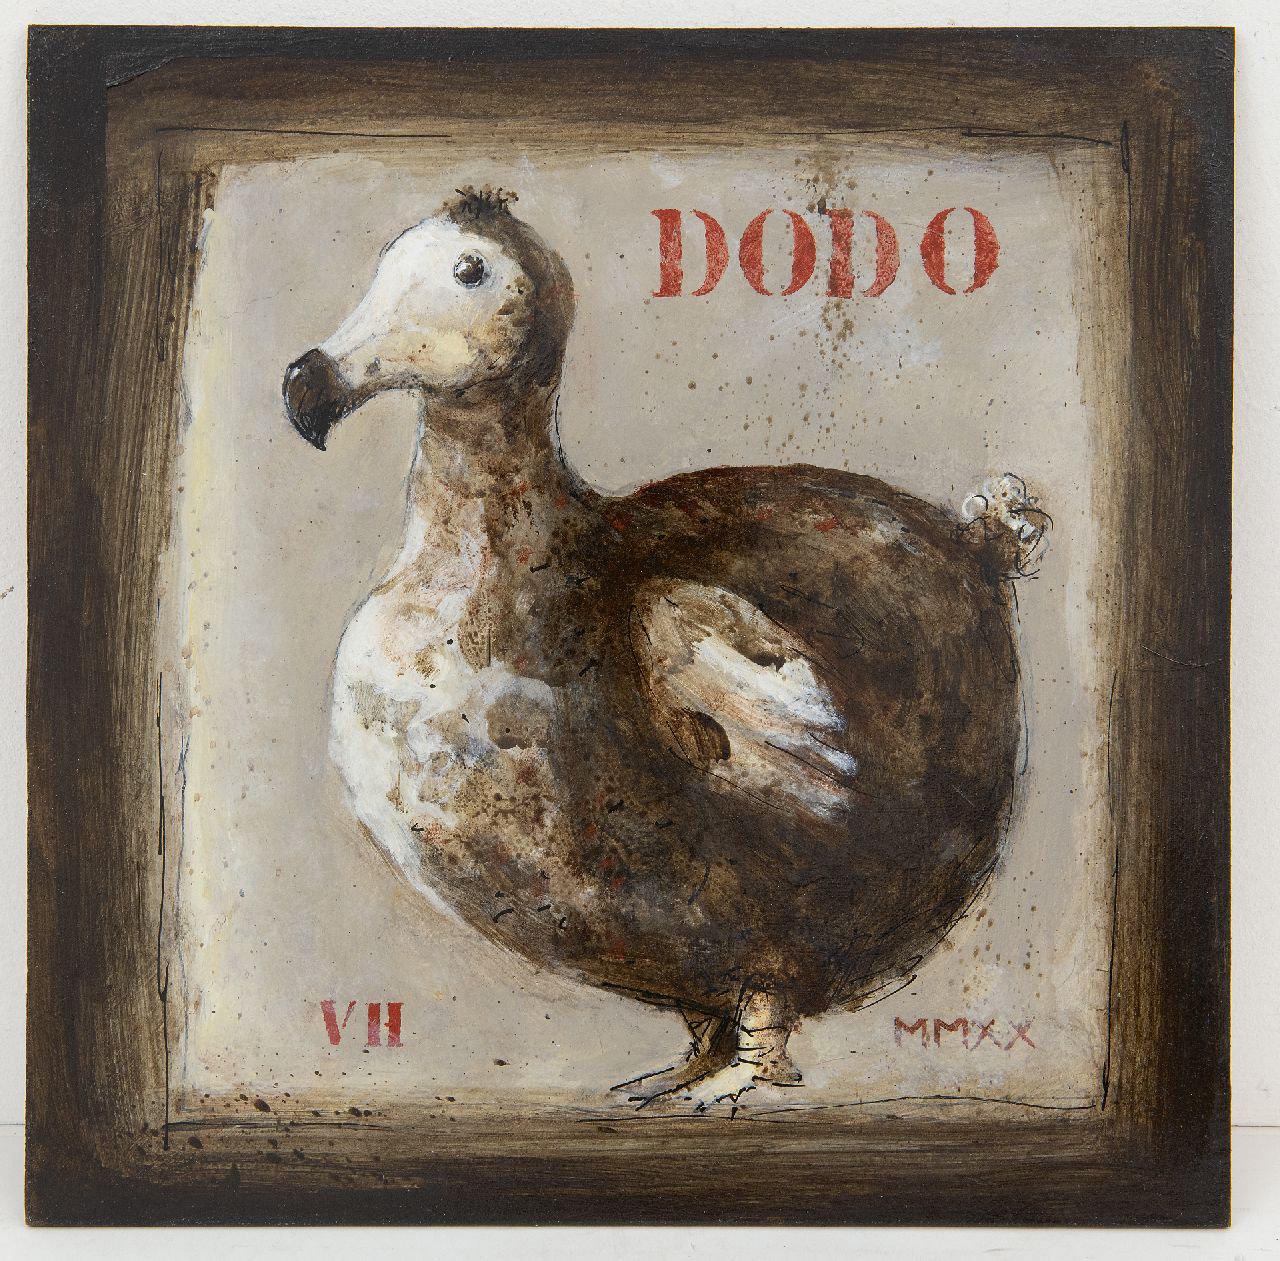 Hemert E. van | Evert van Hemert | Paintings offered for sale | Dodo, acrylic on board 27.8 x 27.9 cm, signed l.l. with initials and dated MMXX